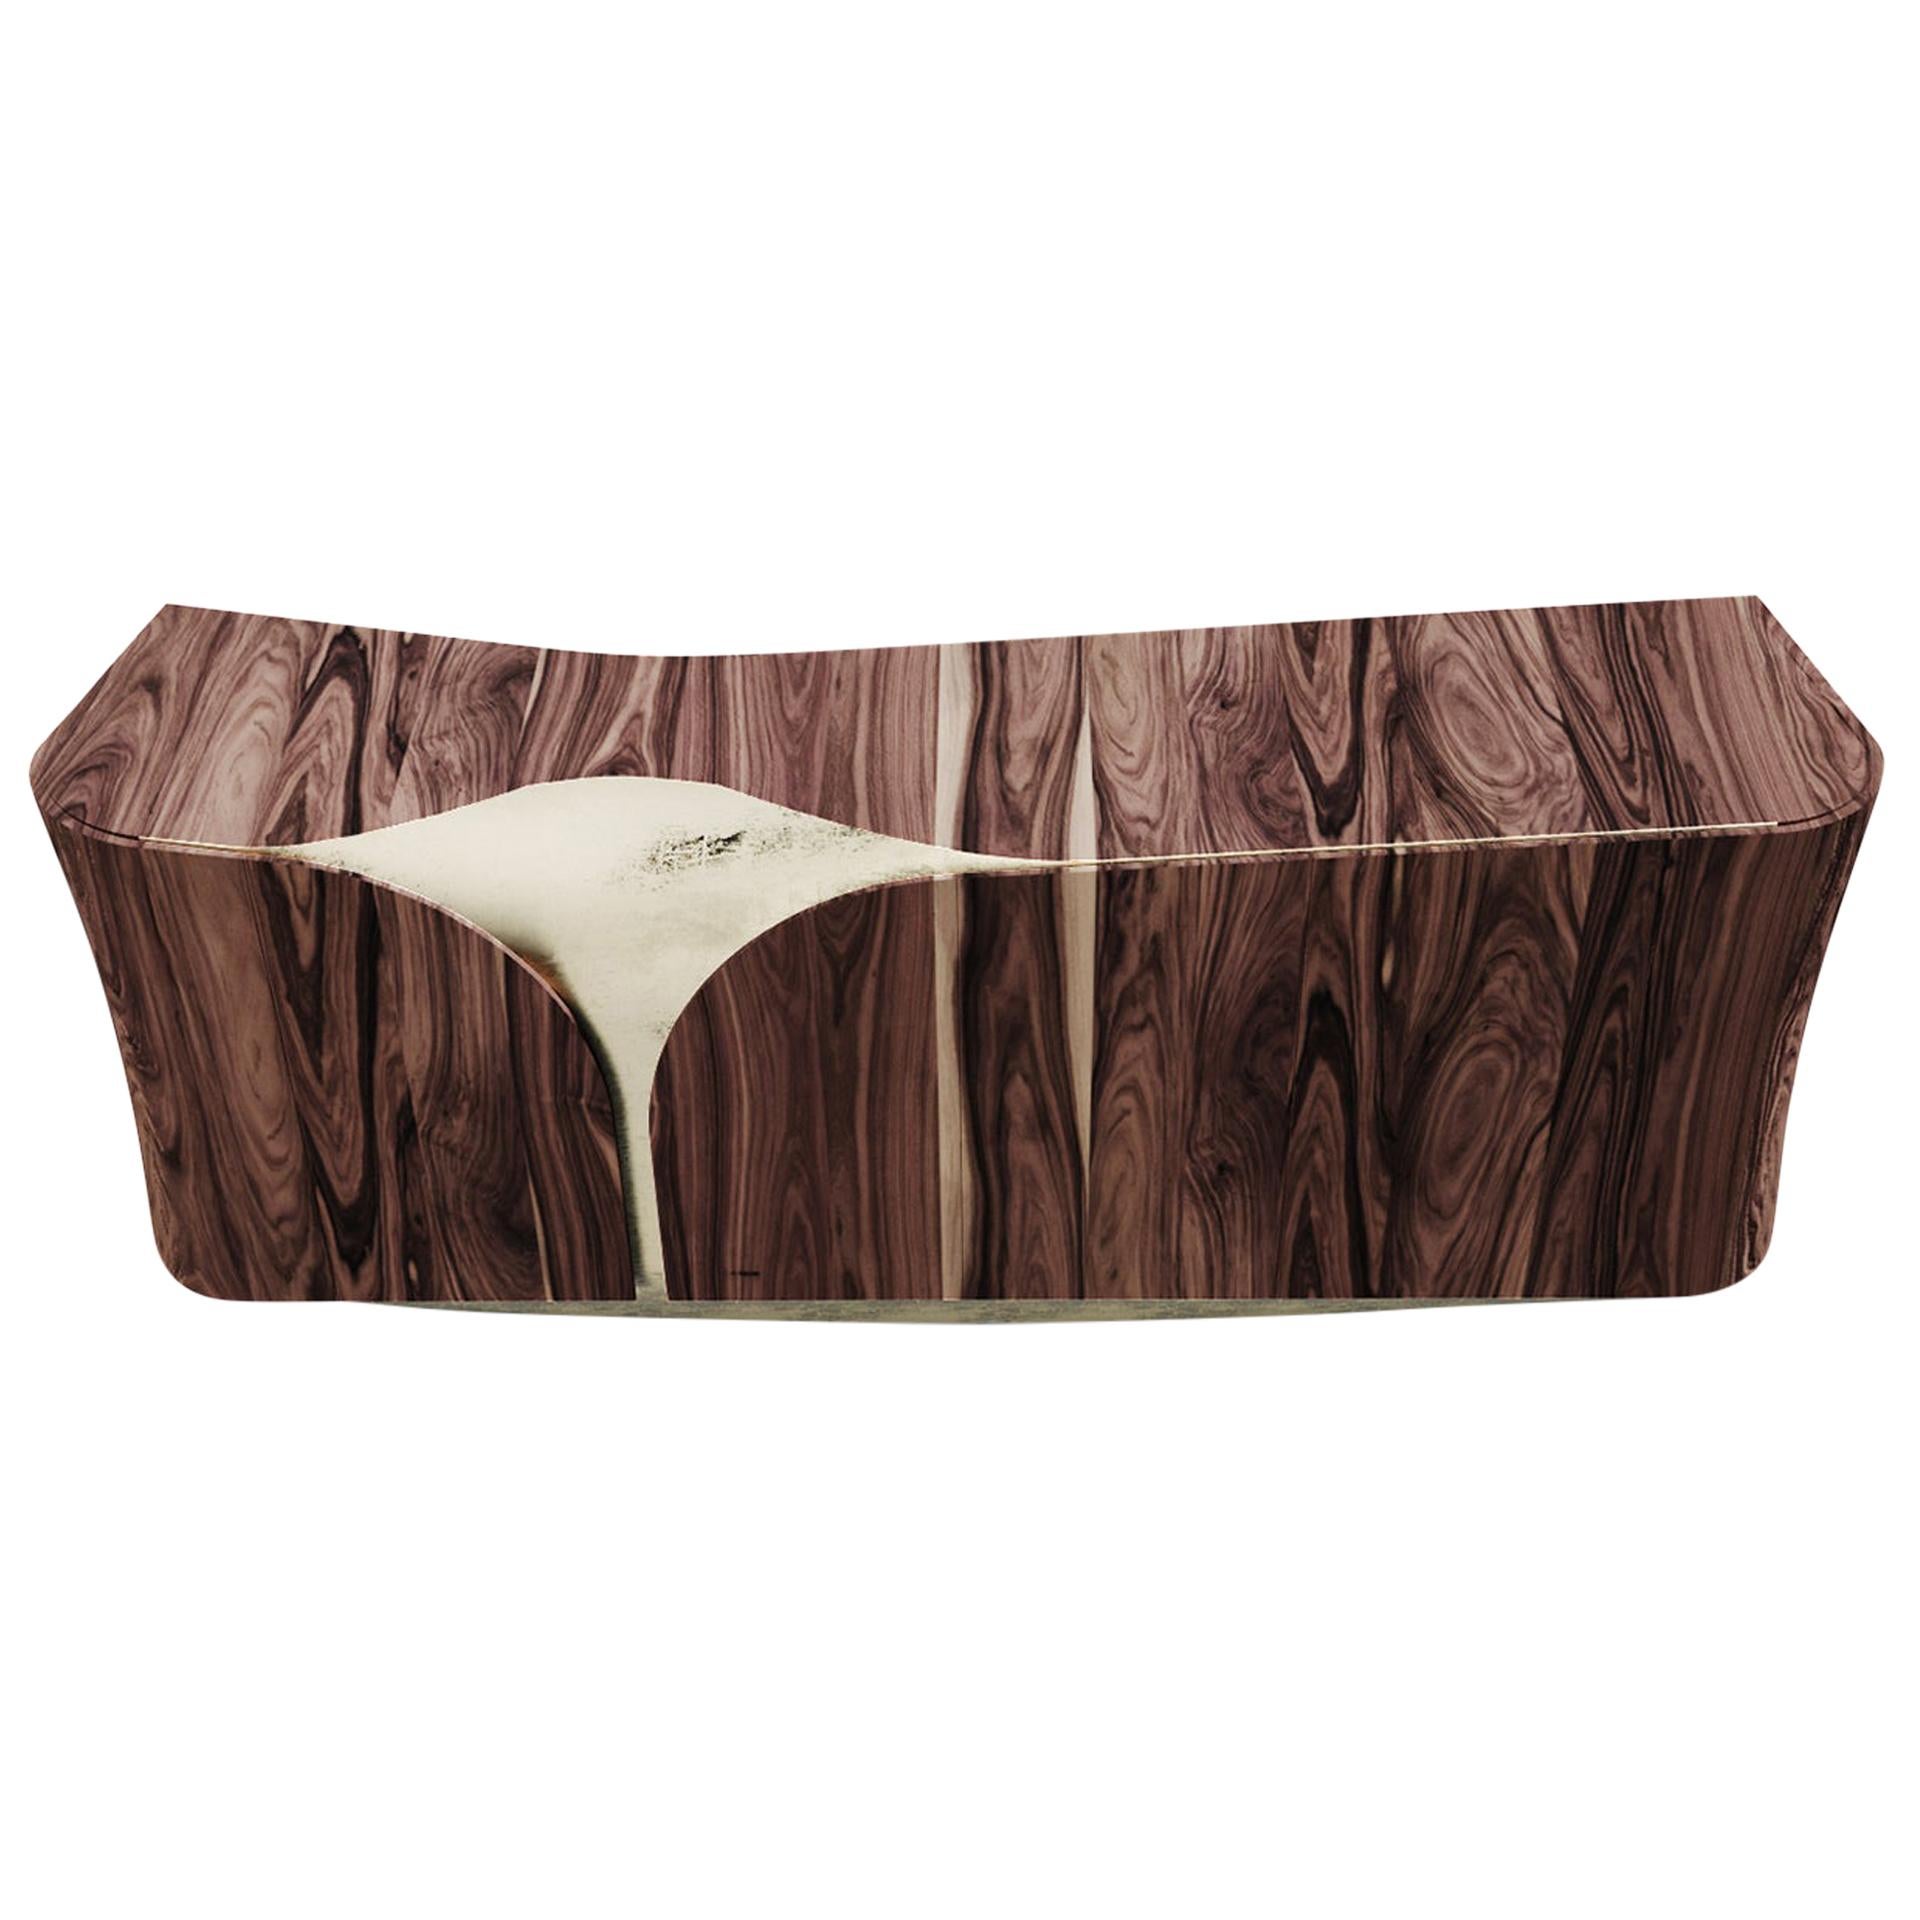 Very Elegant Sidebord, Inspired by a Golden Waterfall in a Modern Nature Style For Sale